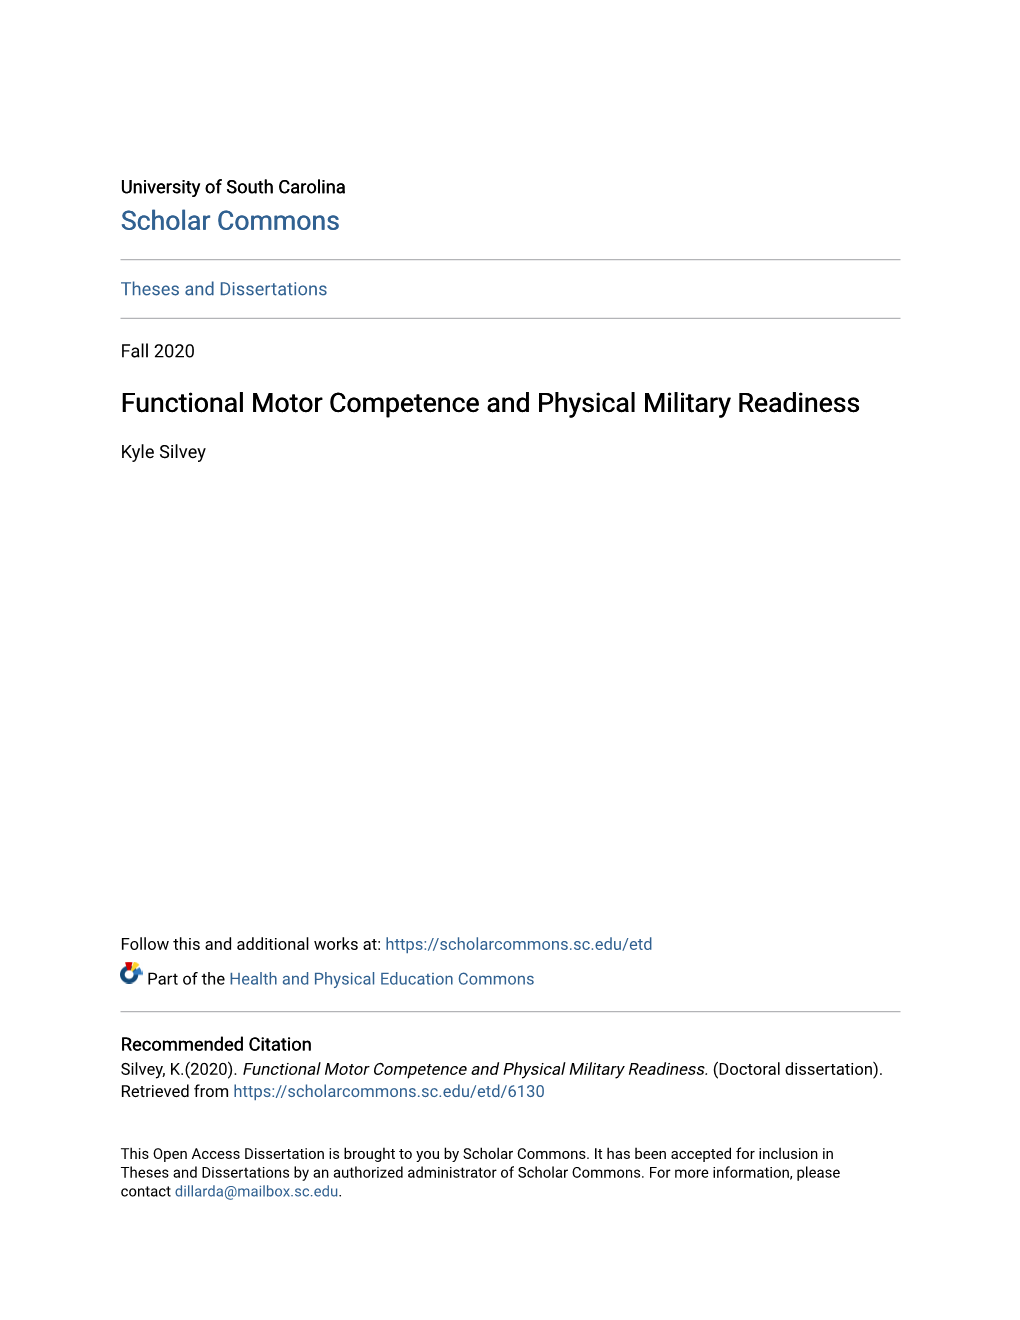 Functional Motor Competence and Physical Military Readiness